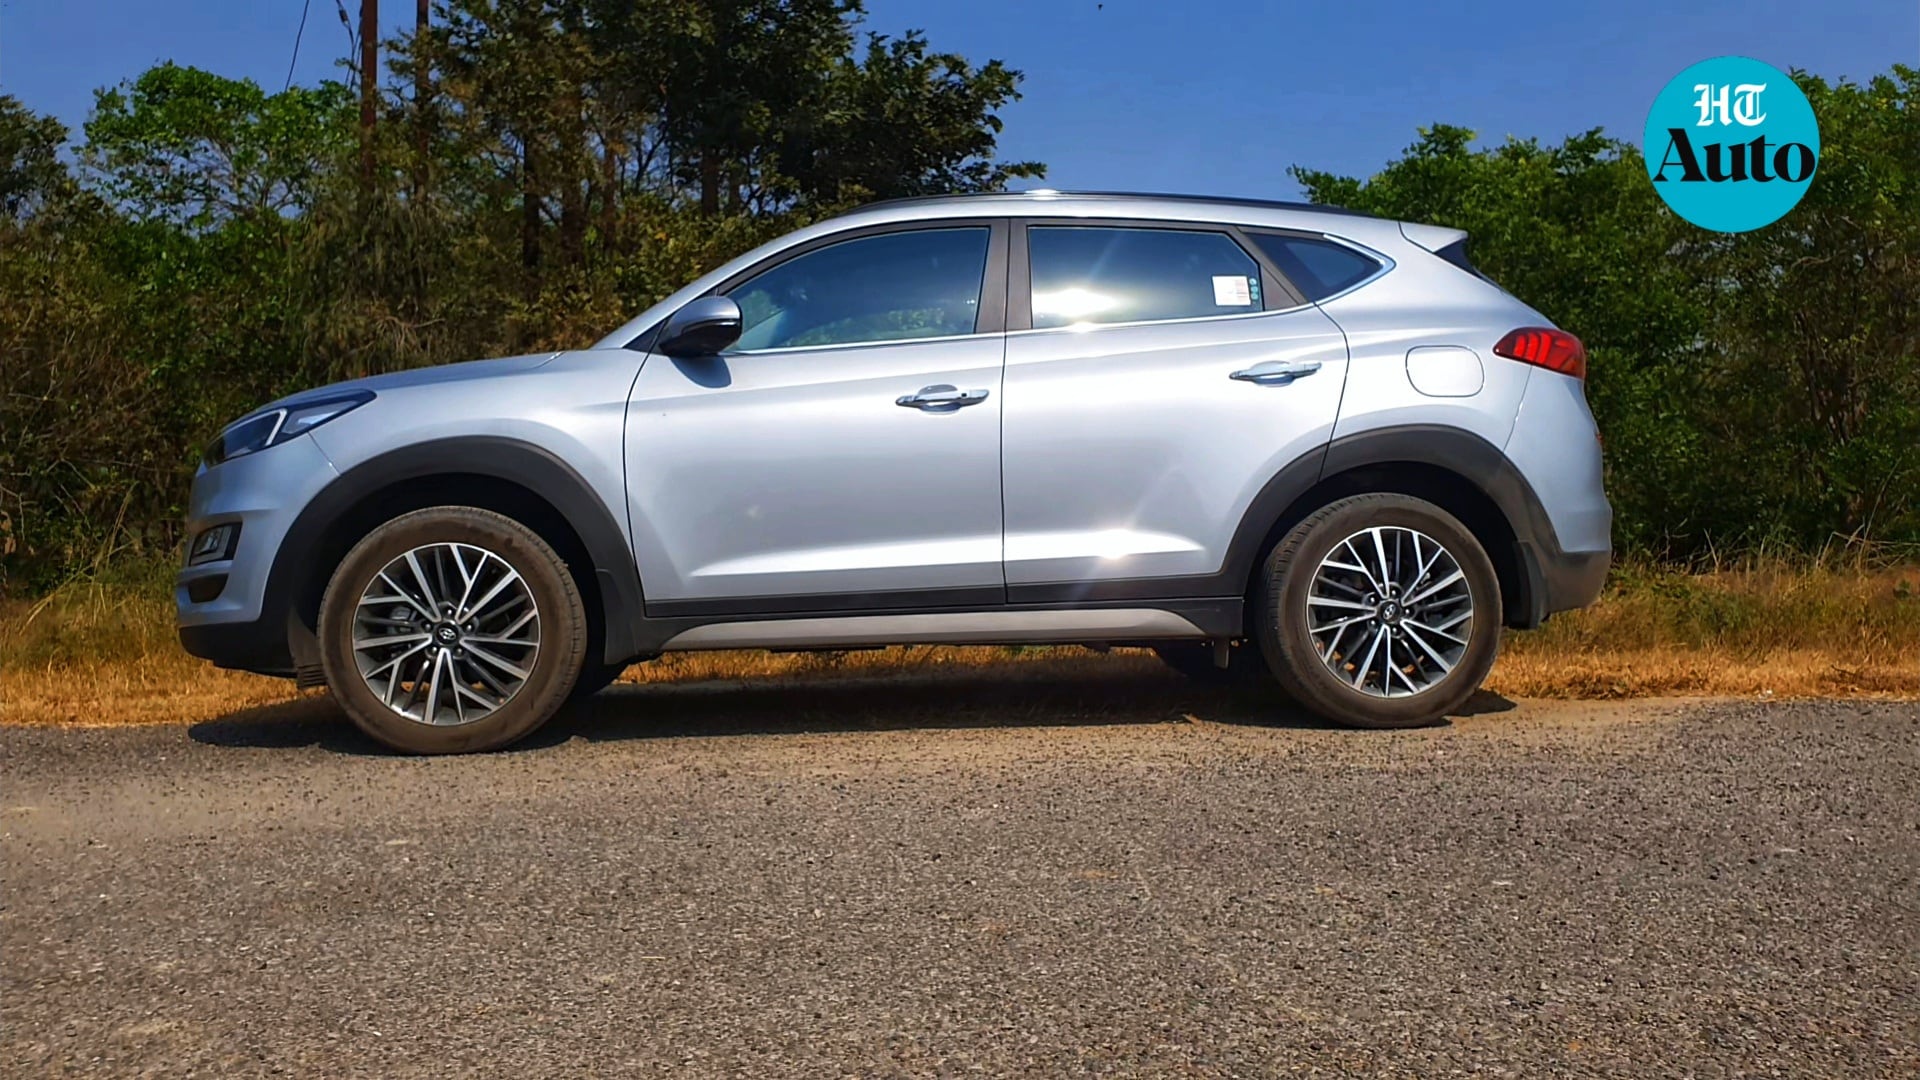 Tucson manages to underline its inherent strengths in the 2020 update even if it could have been a bit more loaded on the feature count. (HT Auto/Sabyasachi Dasgupta)